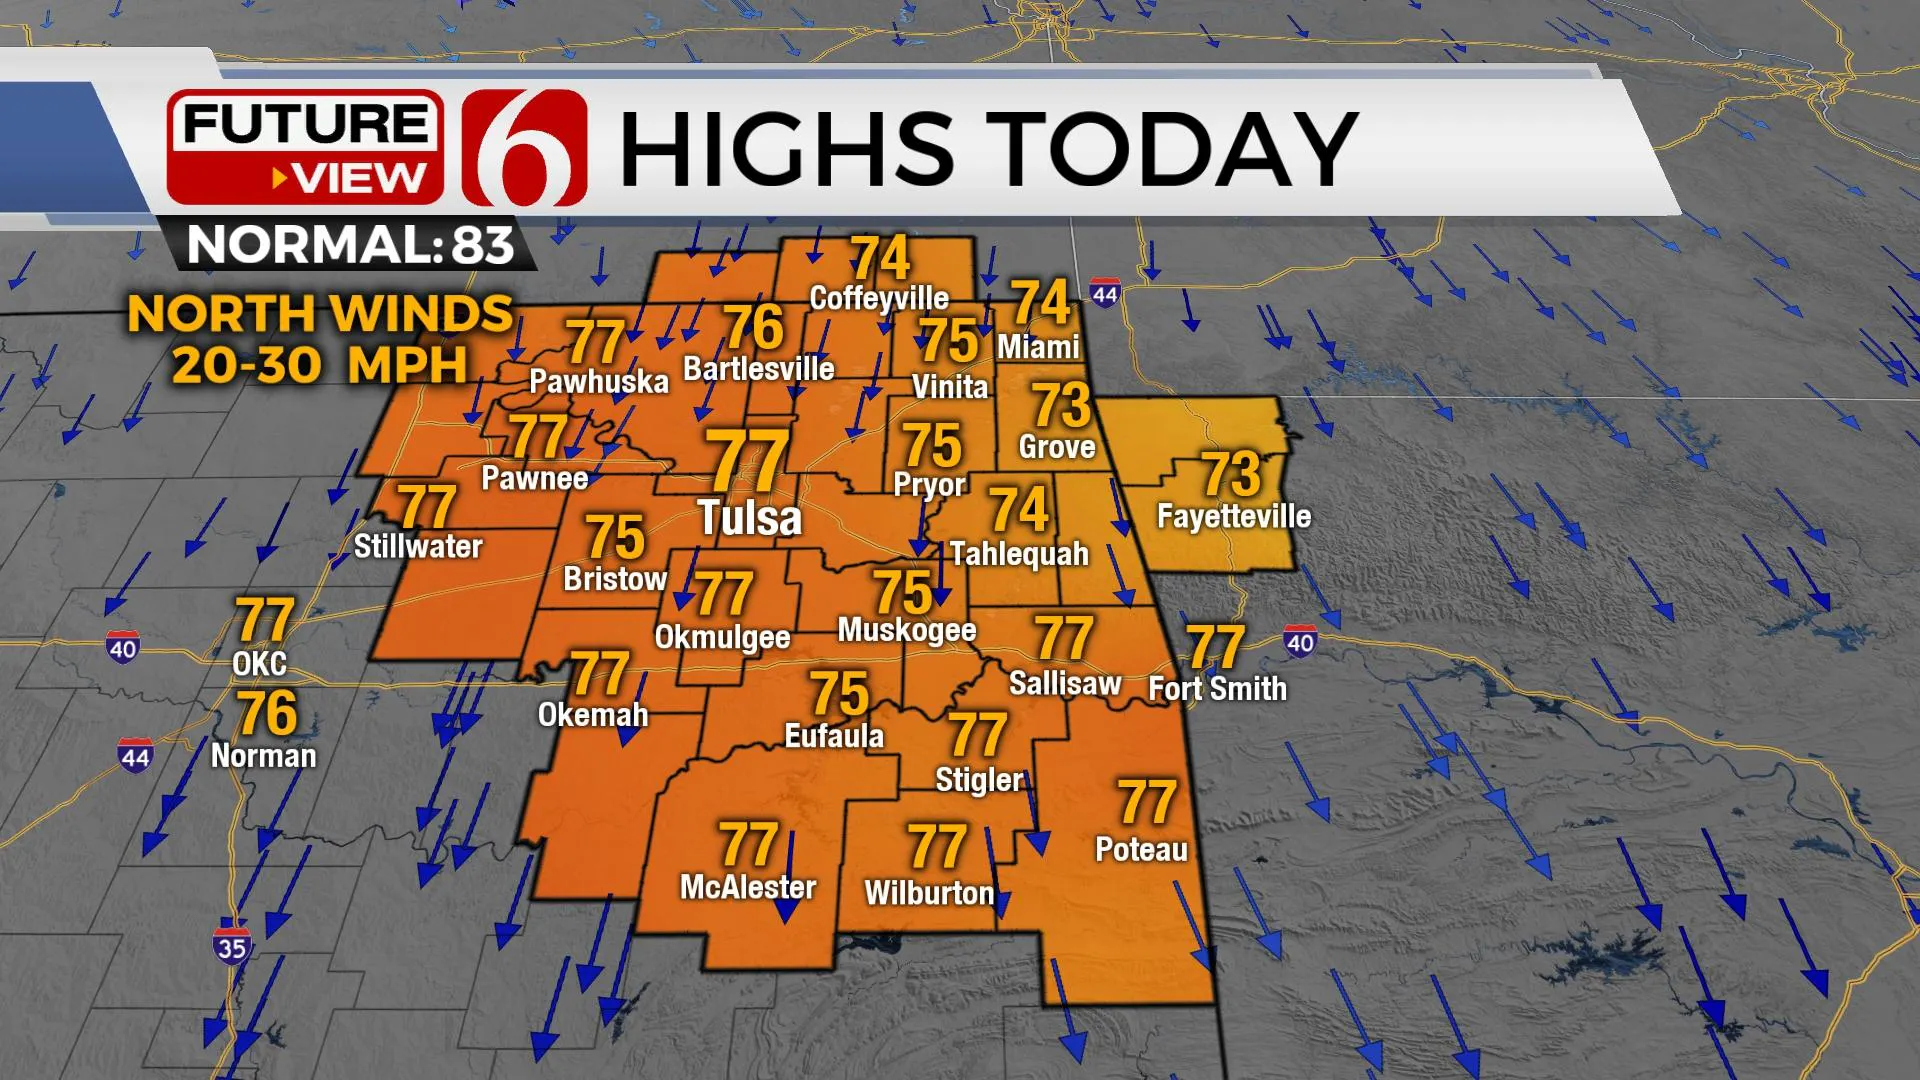 Tuesday Highs